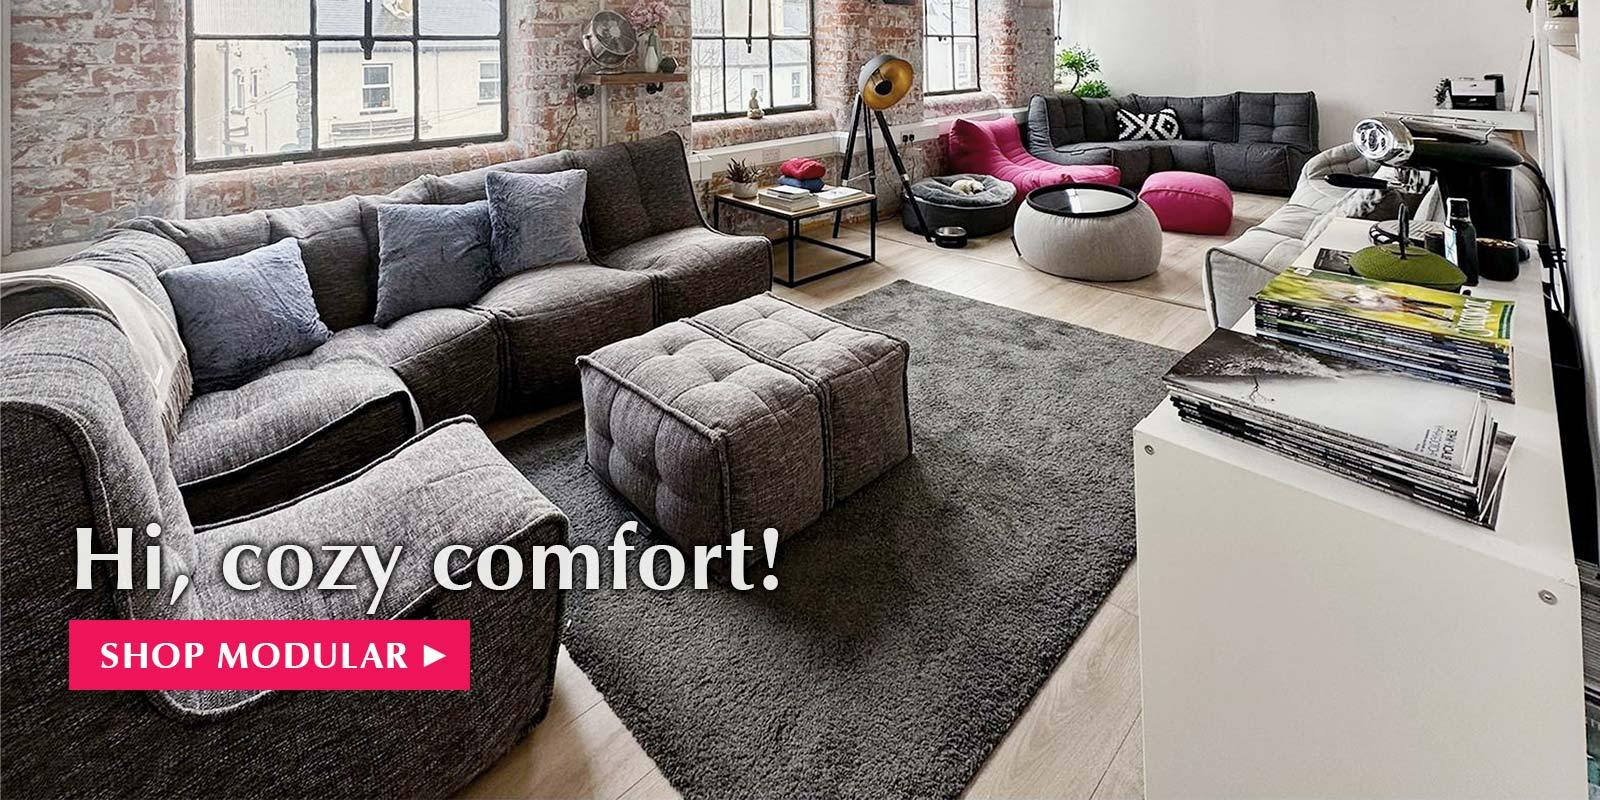 Come home to cozy comfort with Modular.